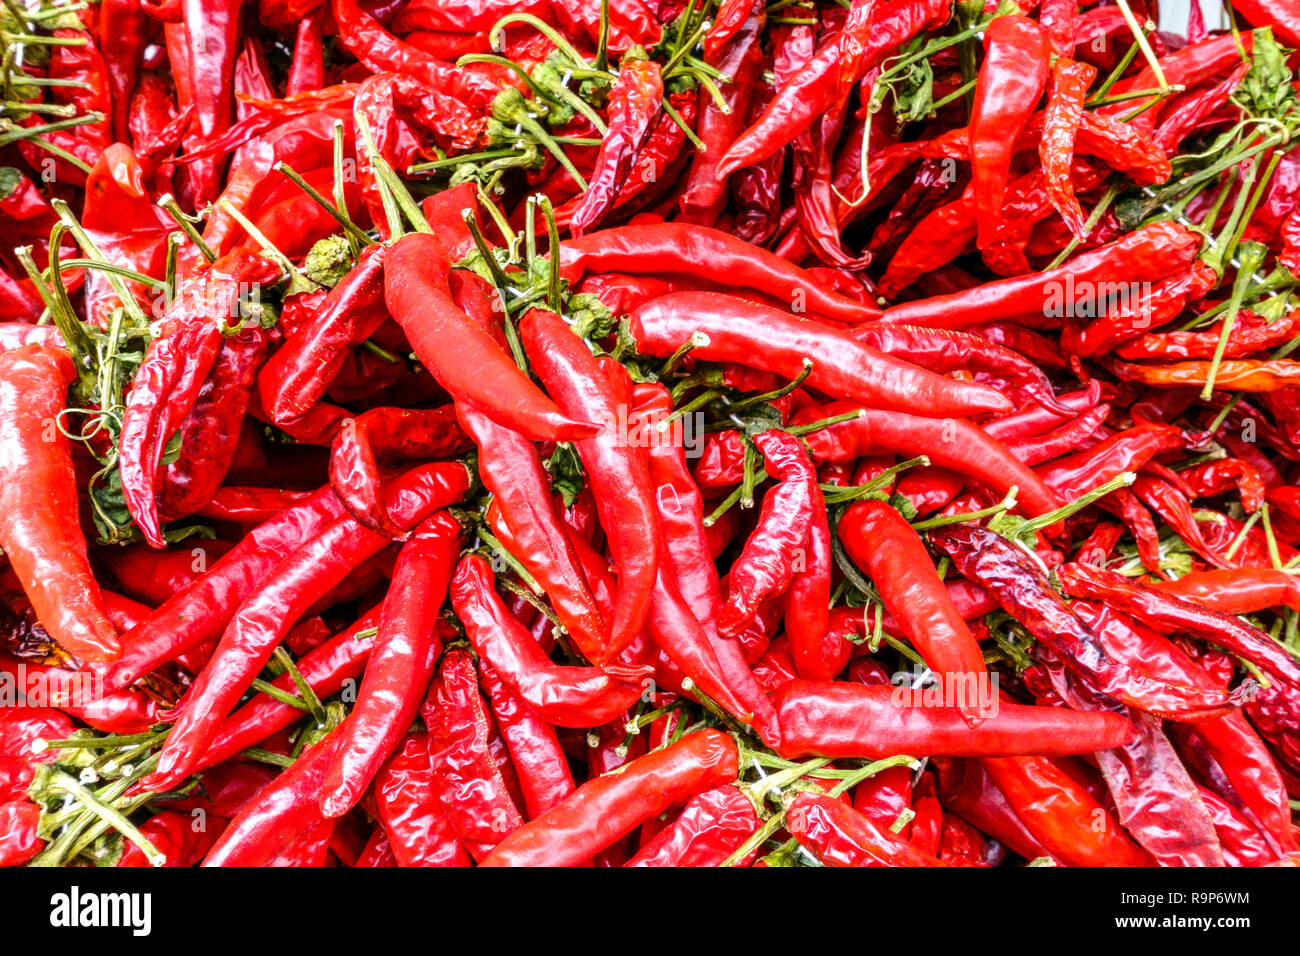 Hot red chilli Peppers at farmers market Spain Stock Photo